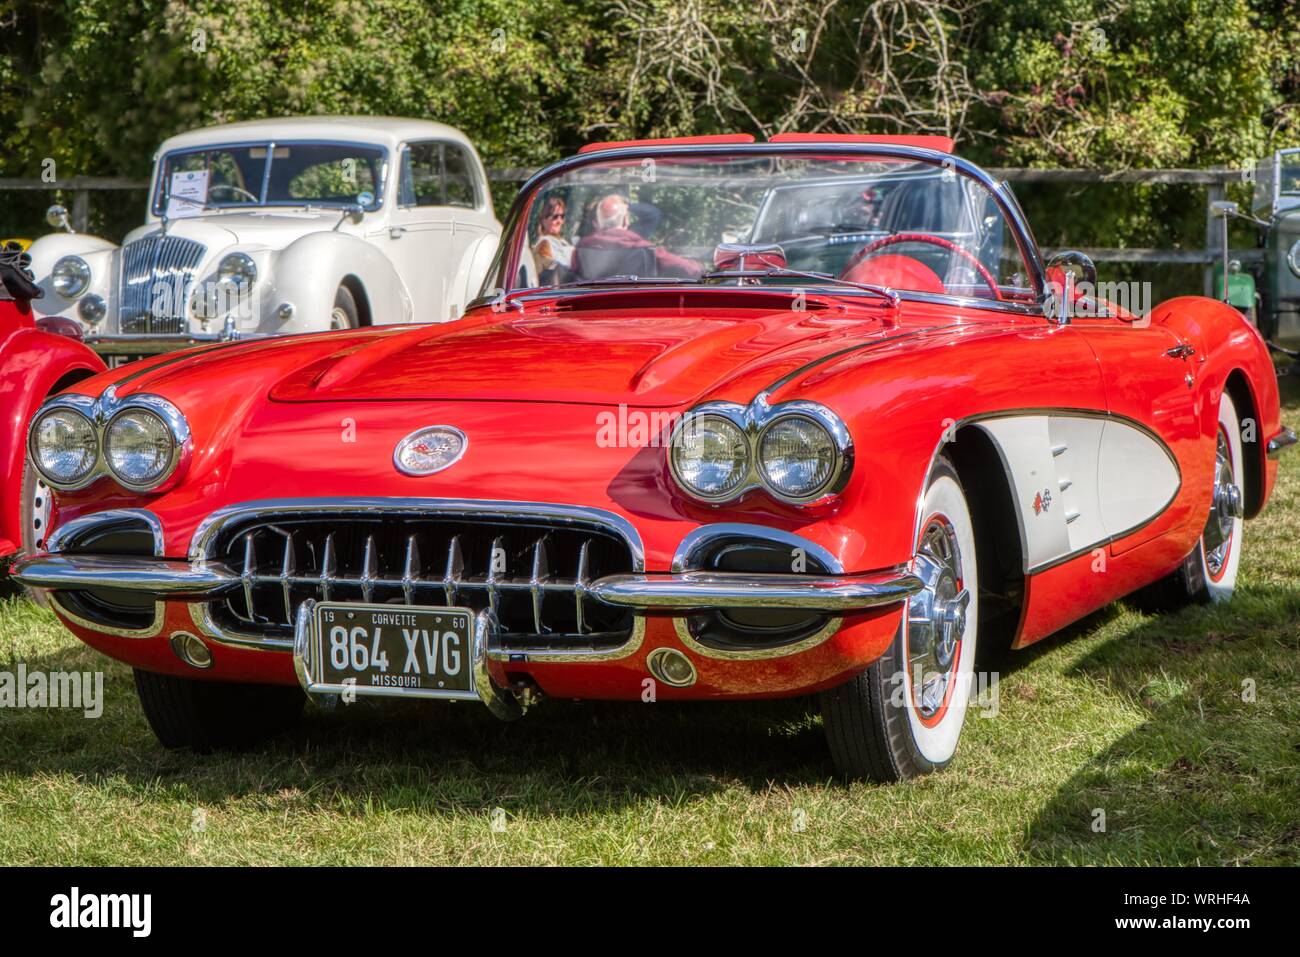 Old red Corvette at a classic car show, Hinton Arms, Cheriton, Hampshire, UK Stock Photo